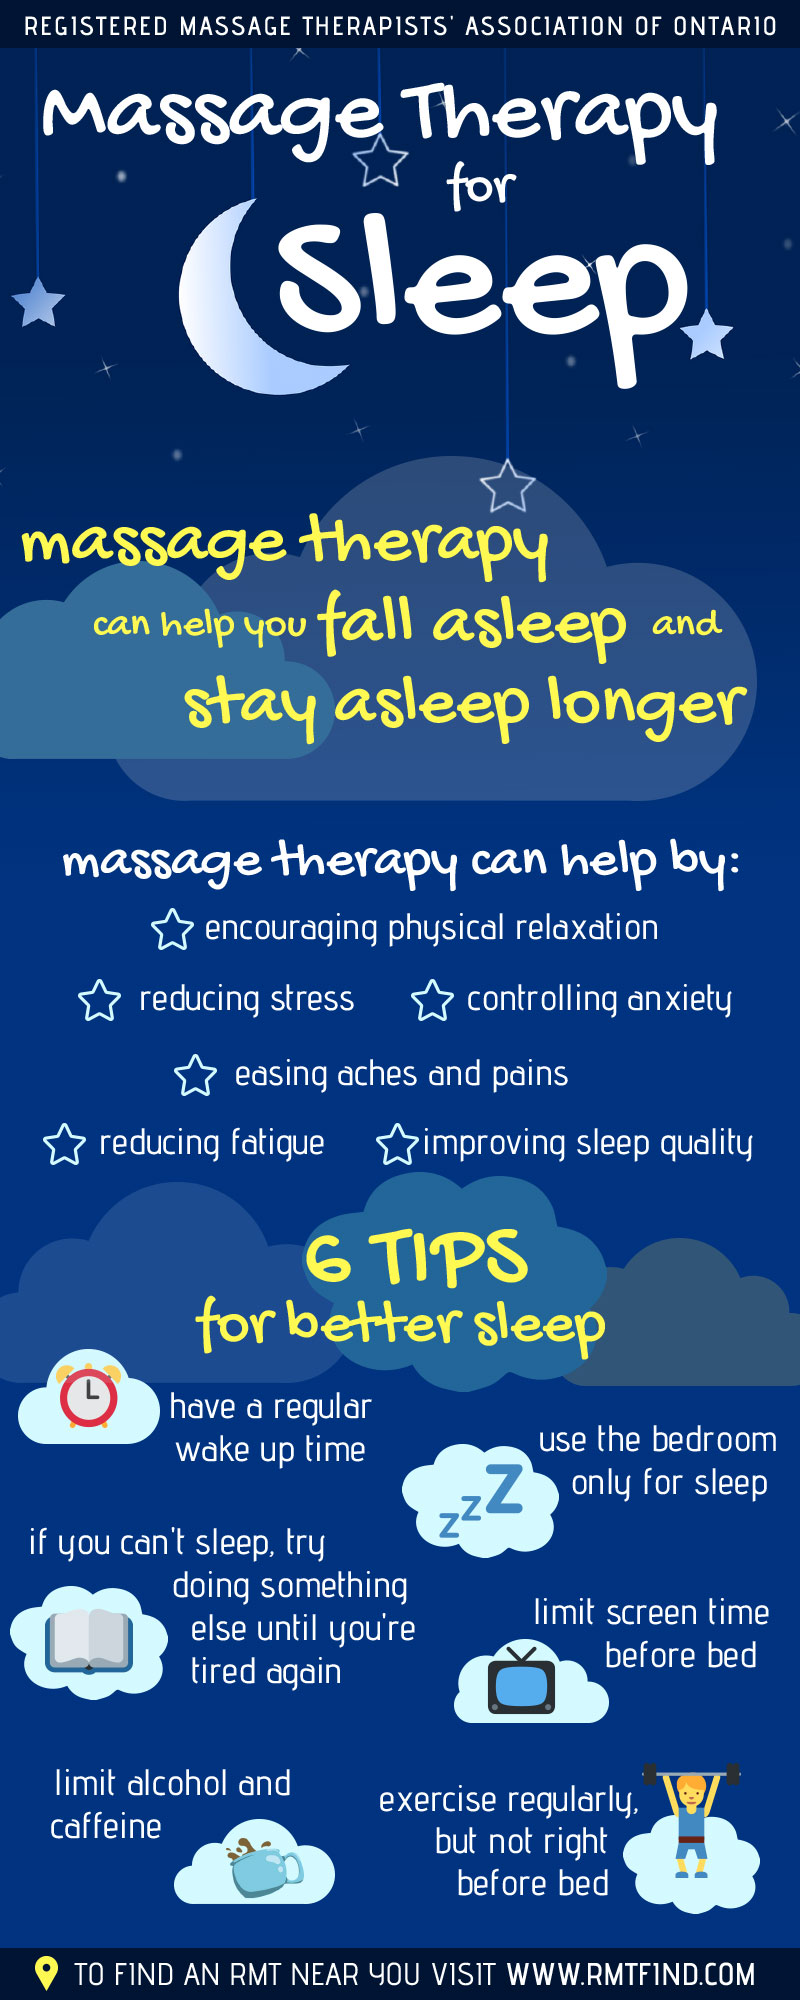 Massage therapy
can help you fall asleep and
stay asleep longer.